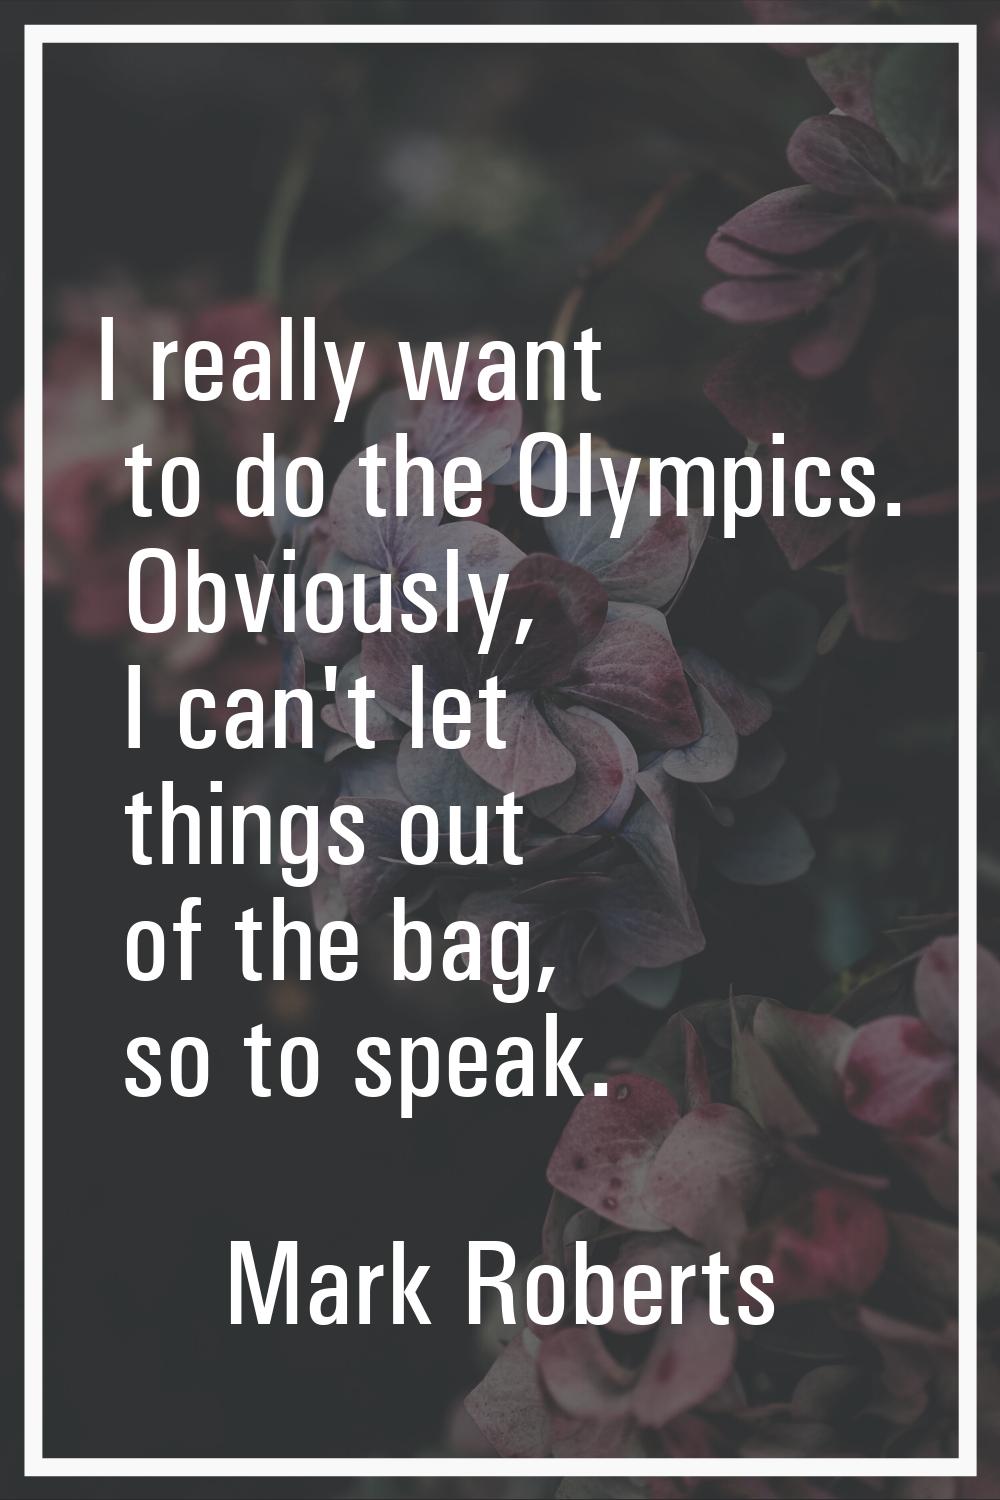 I really want to do the Olympics. Obviously, I can't let things out of the bag, so to speak.